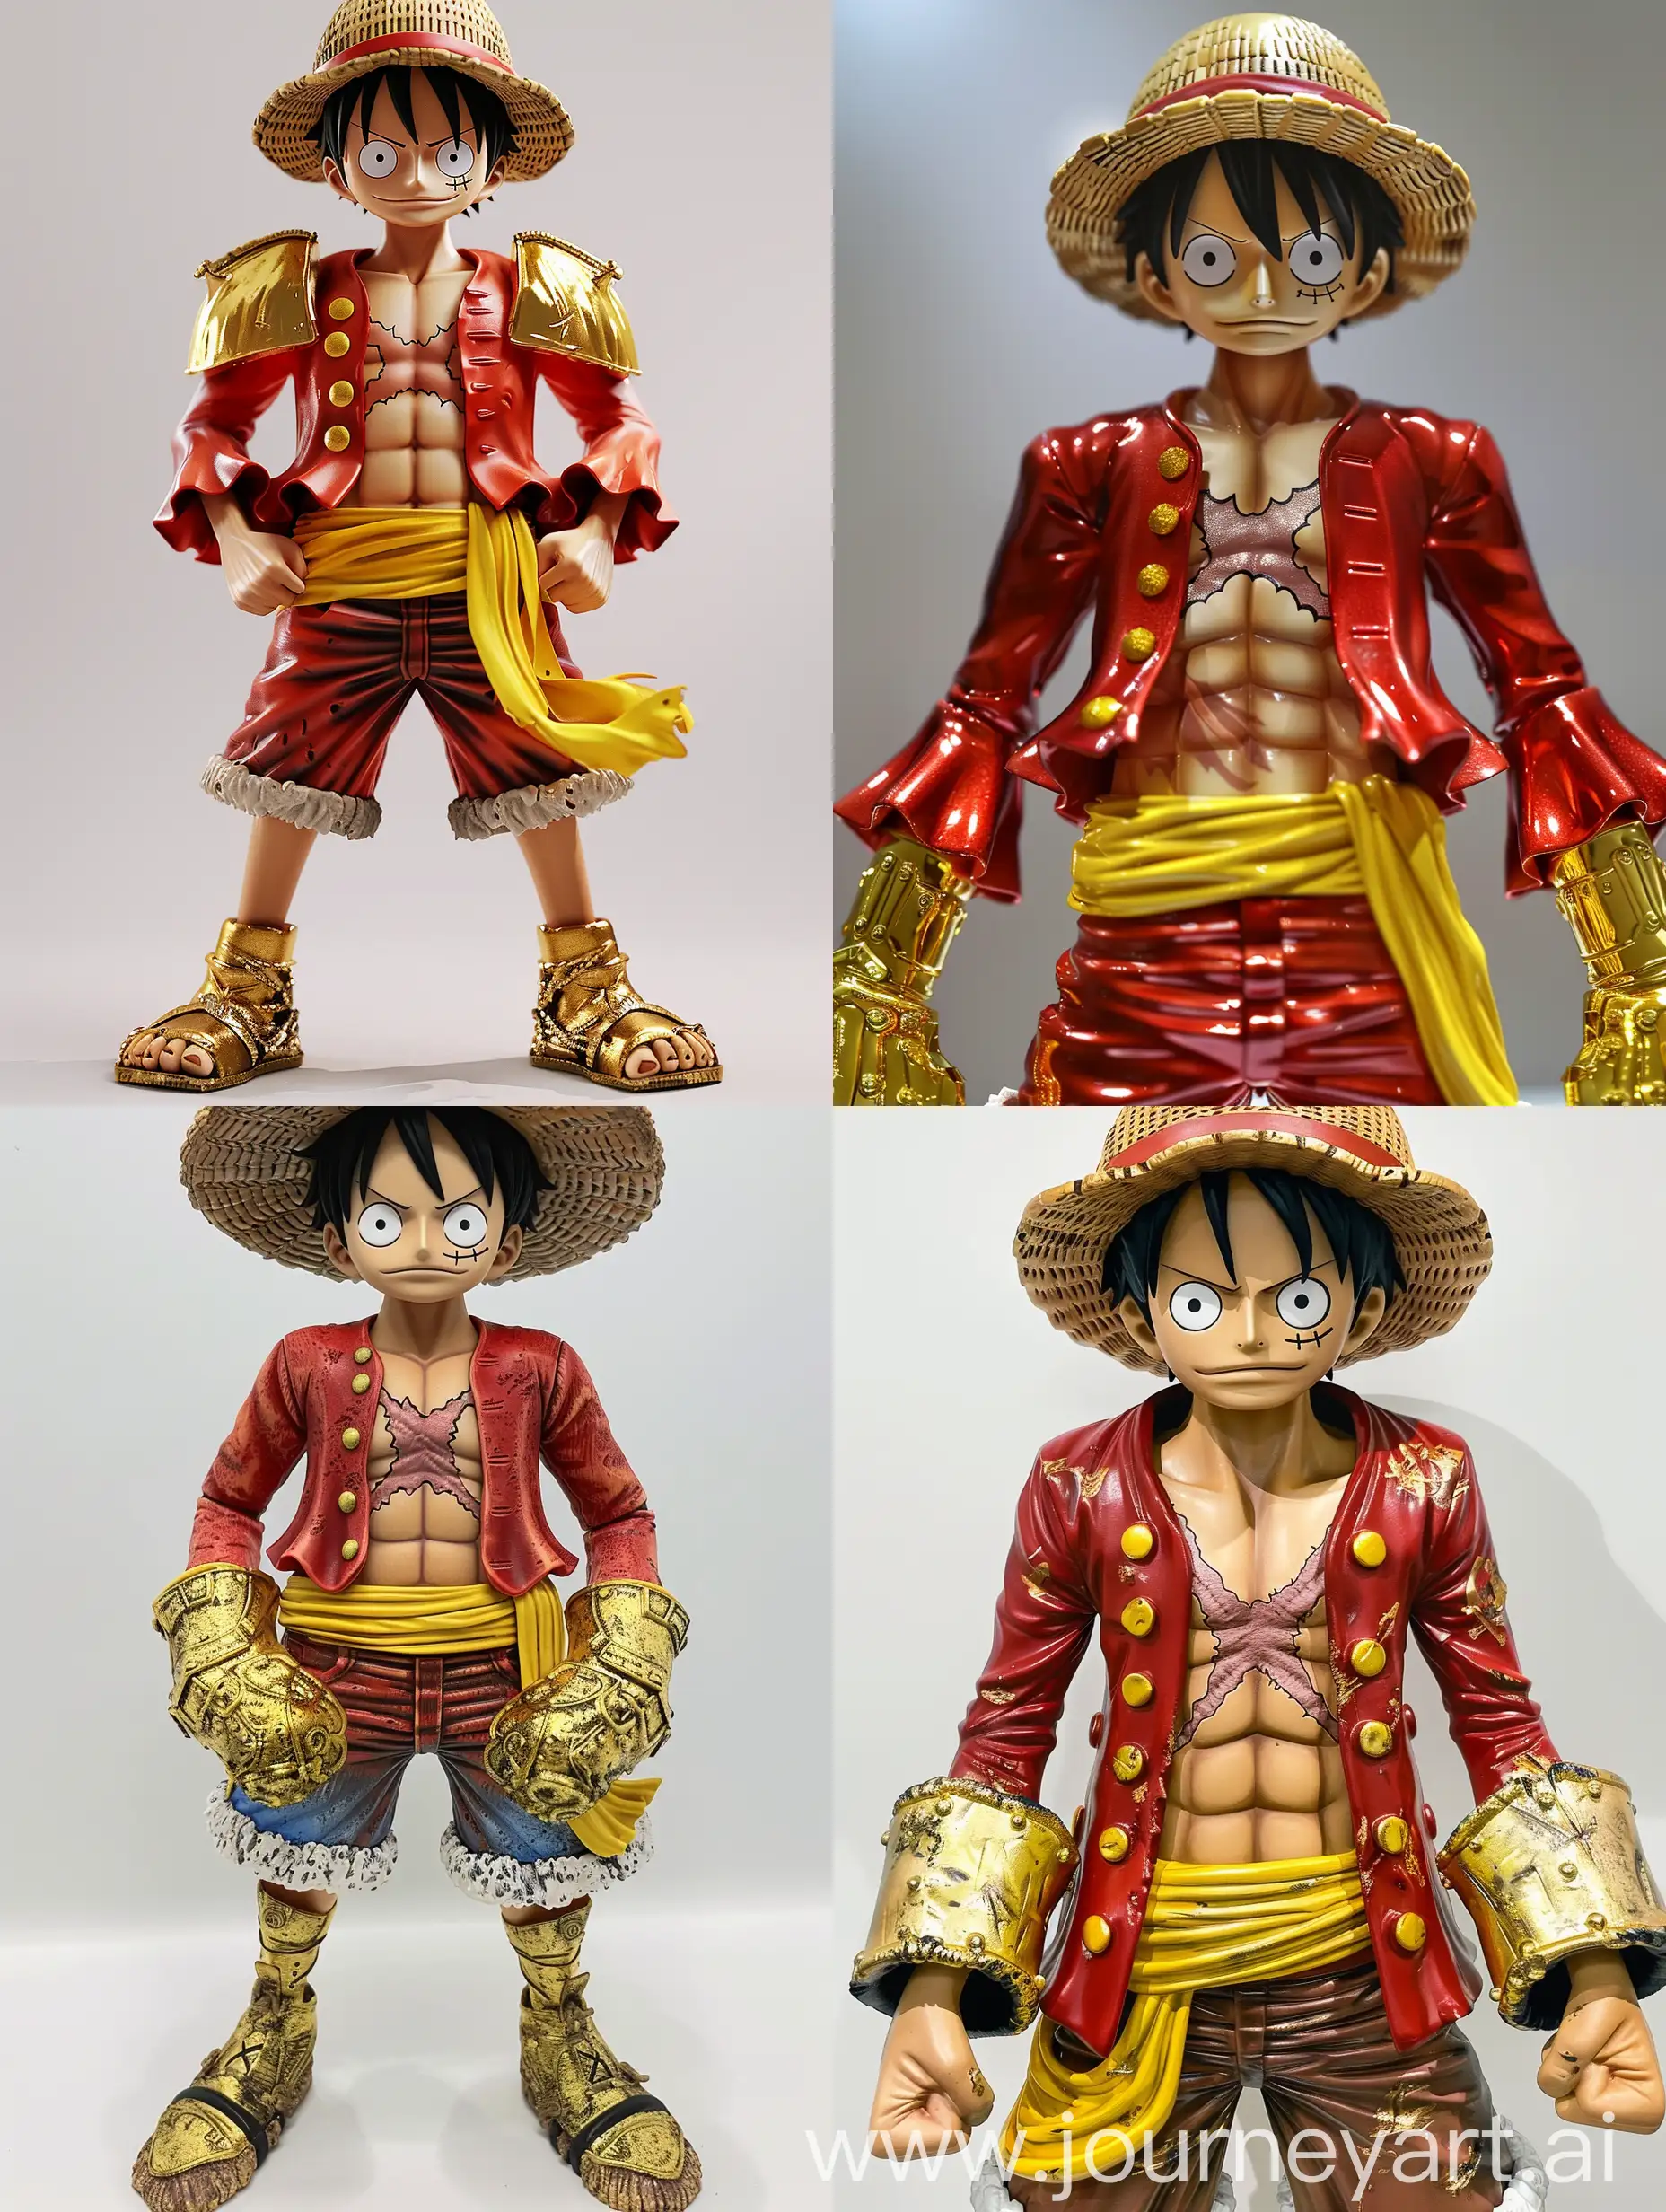 Monkey-D-Luffy-the-Wealthiest-Pirate-Red-and-Yellow-Jacket-with-Gold-Armored-Plates